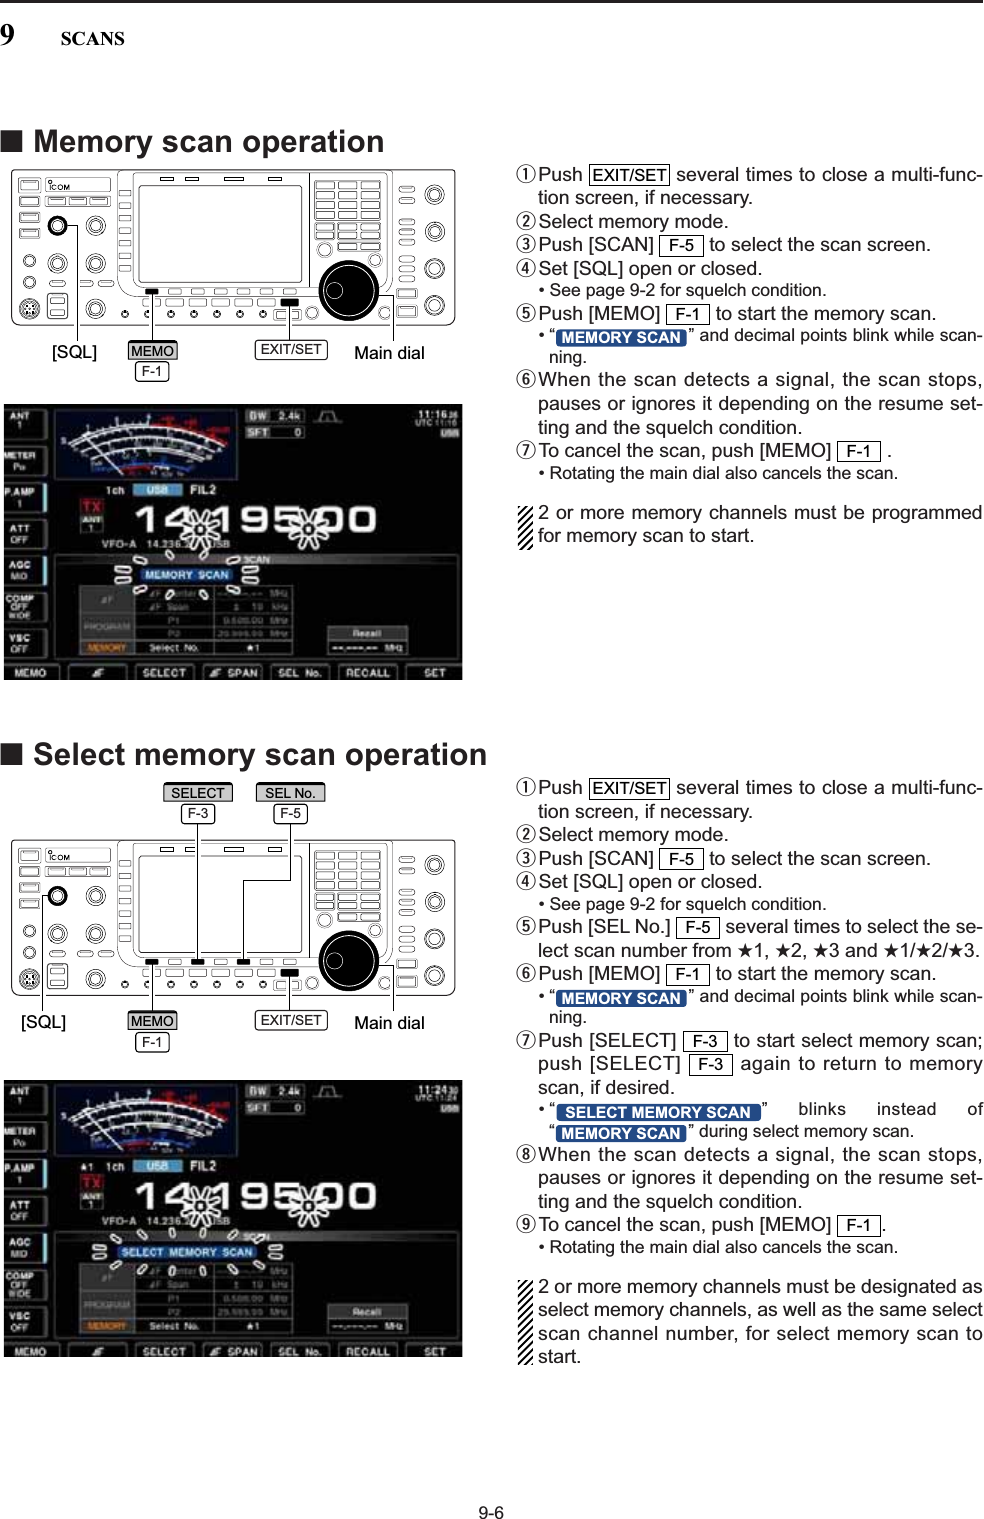 9-6■Memory scan operationqPush  several times to close a multi-func-tion screen, if necessary.wSelect memory mode.ePush [SCAN]  to select the scan screen.rSet [SQL] open or closed.• See page 9-2 for squelch condition.tPush [MEMO]  to start the memory scan.• “ ” and decimal points blink while scan-ning.yWhen the scan detects a signal, the scan stops,pauses or ignores it depending on the resume set-ting and the squelch condition.uTo cancel the scan, push [MEMO]  .• Rotating the main dial also cancels the scan.2 or more memory channels must be programmedfor memory scan to start.■Select memory scan operationqPush  several times to close a multi-func-tion screen, if necessary.wSelect memory mode.ePush [SCAN]  to select the scan screen.rSet [SQL] open or closed.• See page 9-2 for squelch condition.tPush [SEL No.]  several times to select the se-lect scan number from ★1, ★2, ★3 and ★1/★2/★3.yPush [MEMO]  to start the memory scan.• “ ” and decimal points blink while scan-ning.uPush [SELECT]  to start select memory scan;push [SELECT]  again to return to memoryscan, if desired.• “ ” blinks instead of“ ” during select memory scan.iWhen the scan detects a signal, the scan stops,pauses or ignores it depending on the resume set-ting and the squelch condition.oTo cancel the scan, push [MEMO]  .• Rotating the main dial also cancels the scan.2 or more memory channels must be designated asselect memory channels, as well as the same selectscan channel number, for select memory scan tostart.F-1MEMORY SCANSELECT MEMORY SCANF-3F-3MEMORY SCANF-1F-5F-5EXIT/SETF-1MEMORY SCANF-1F-5EXIT/SET[SQL] Main dialEXIT/SETF-1MEMOF-3SELECTF-5SEL No.[SQL] Main dialEXIT/SETF-1MEMO9SCANS